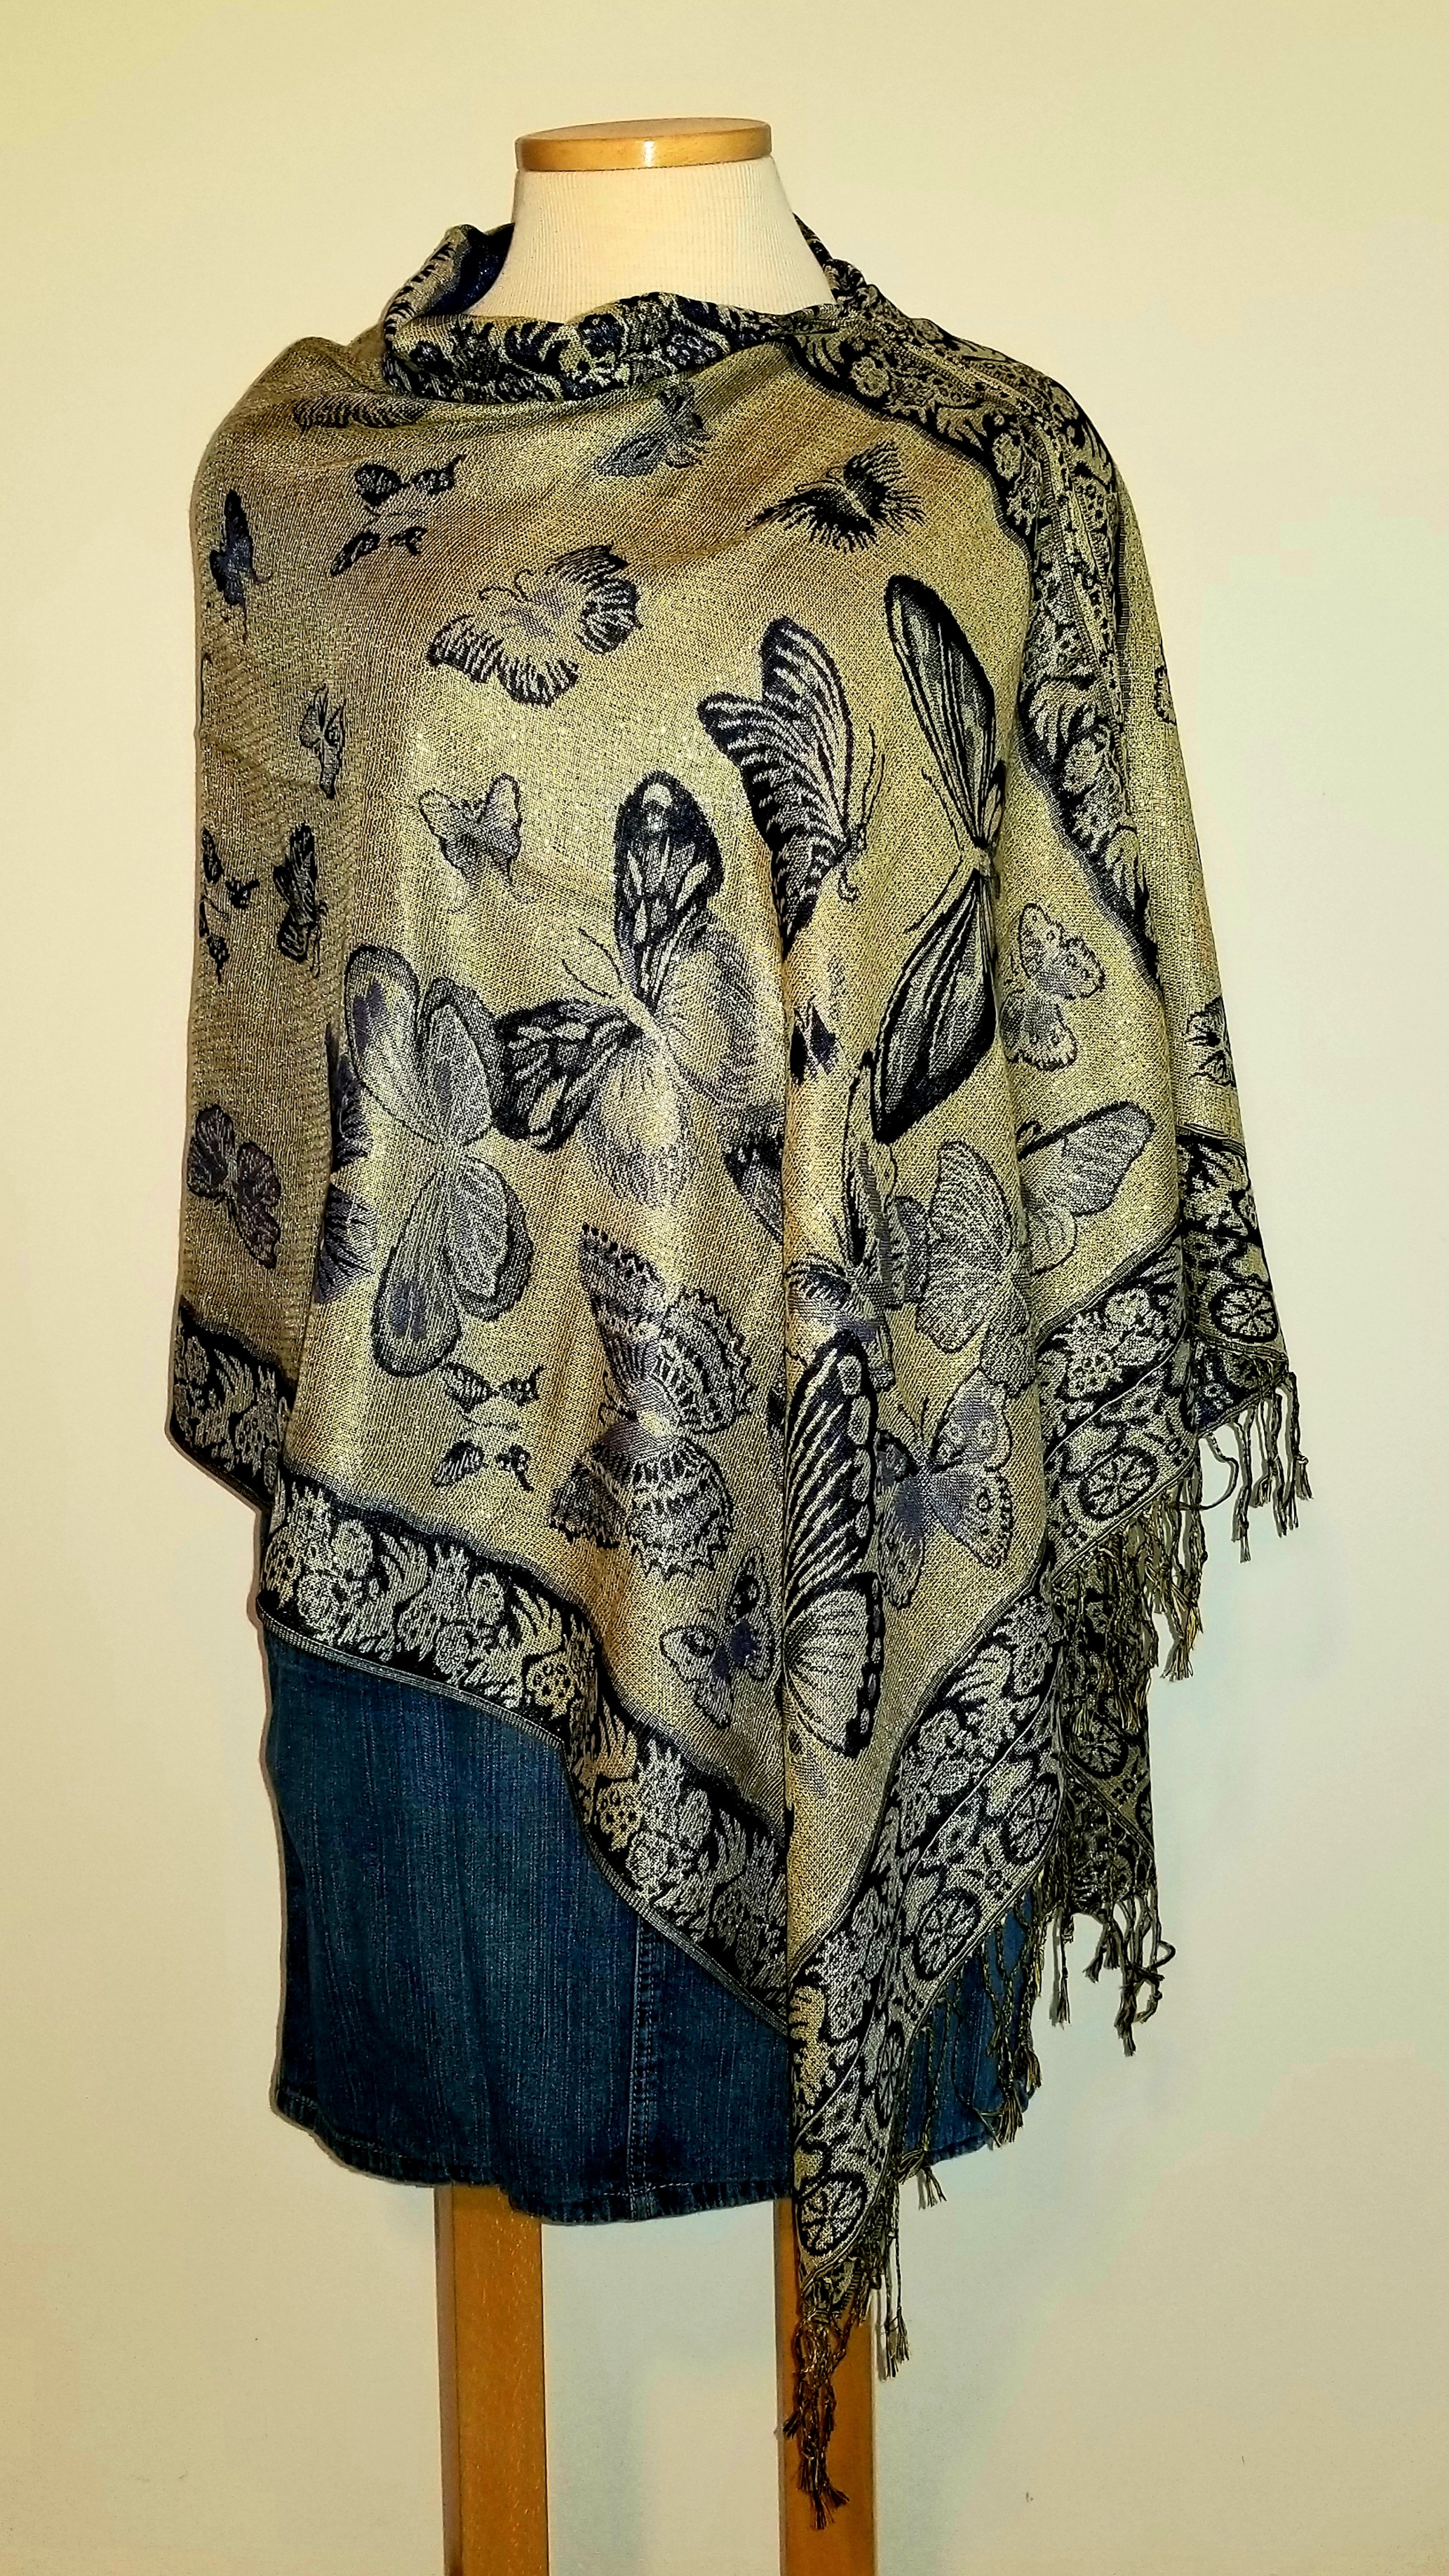 This Butterflies in Royal Blue and Gold Popover Reversible Shawlmina Shawl- Silk Blend - Fits most is made with love by The Creative Soul Sisters! Shop more unique gift ideas today with Spots Initiatives, the best way to support creators.